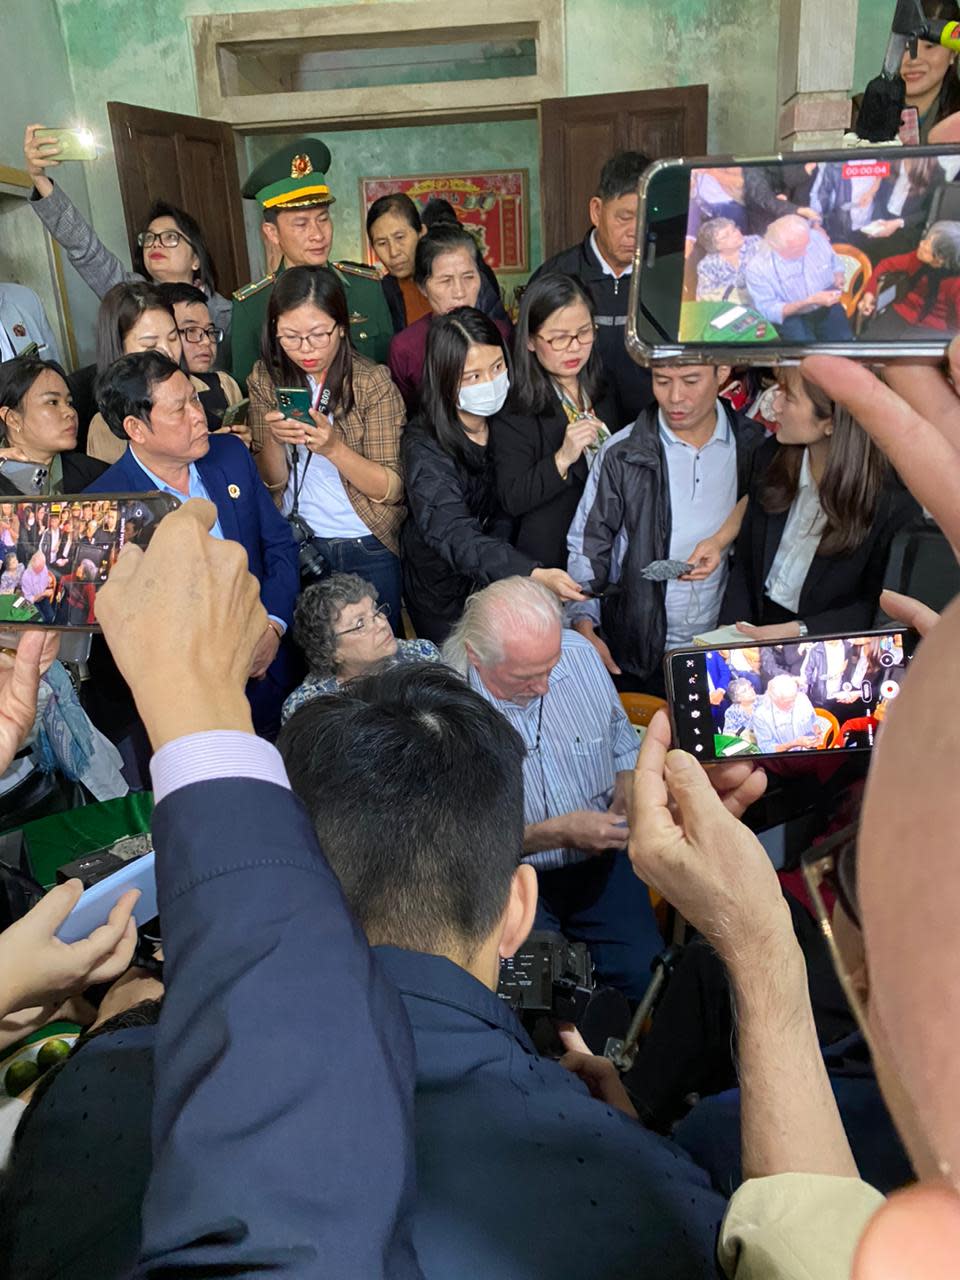 Peter Mathews arrives at the home of relatives of Cao Van Tuat, who died during the war in 1967. Asked, earlier in his visit, about the relationship between the U.S. and Vietnam, he replied, “I am not a politician. ... I am here on a humanitarian mission between myself and Vietnam.”